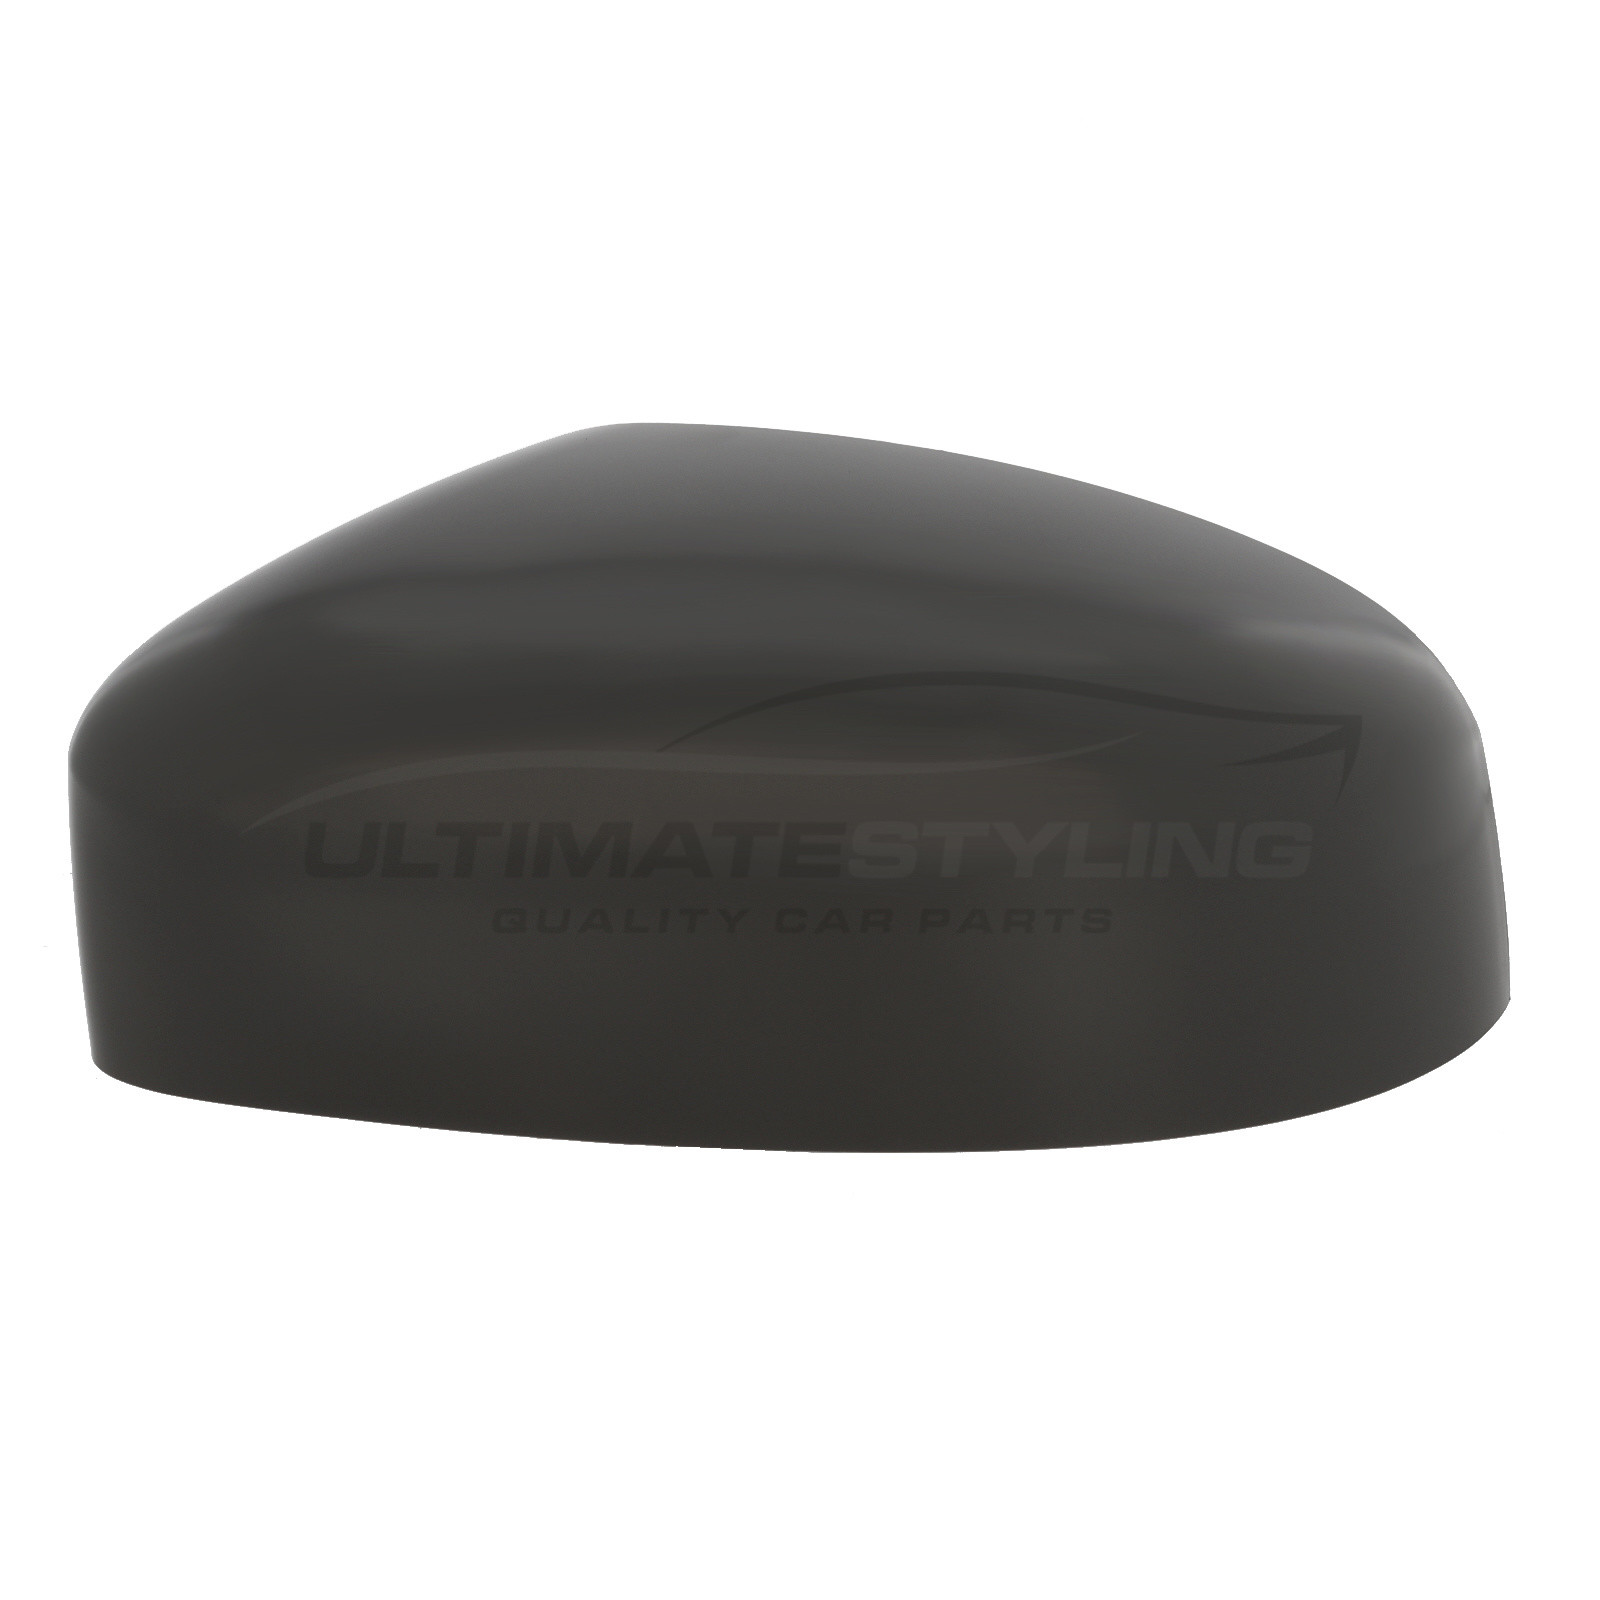 Ford Focus 2008-2018, Ford Mondeo 2011-2015 Wing Mirror Cover Cap Casing Primed Passenger Side (LH)